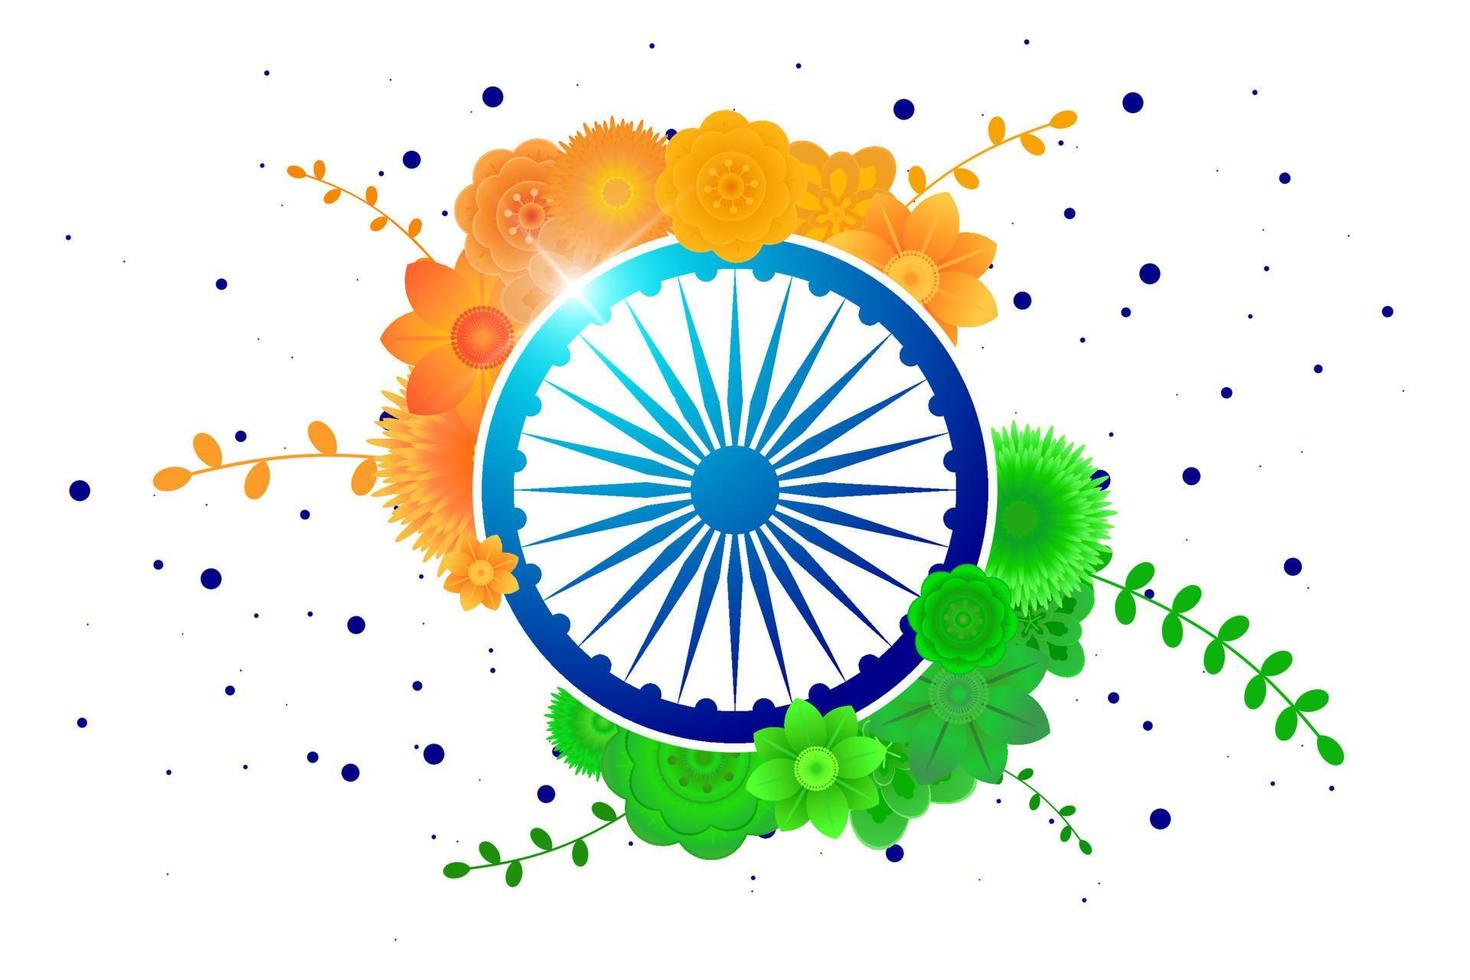 Indian independence 15 august or republic day 26 january banner. India country national holiday flyer. Celebration poster of flowers in flag colors with wheel symbol. Vector illustration